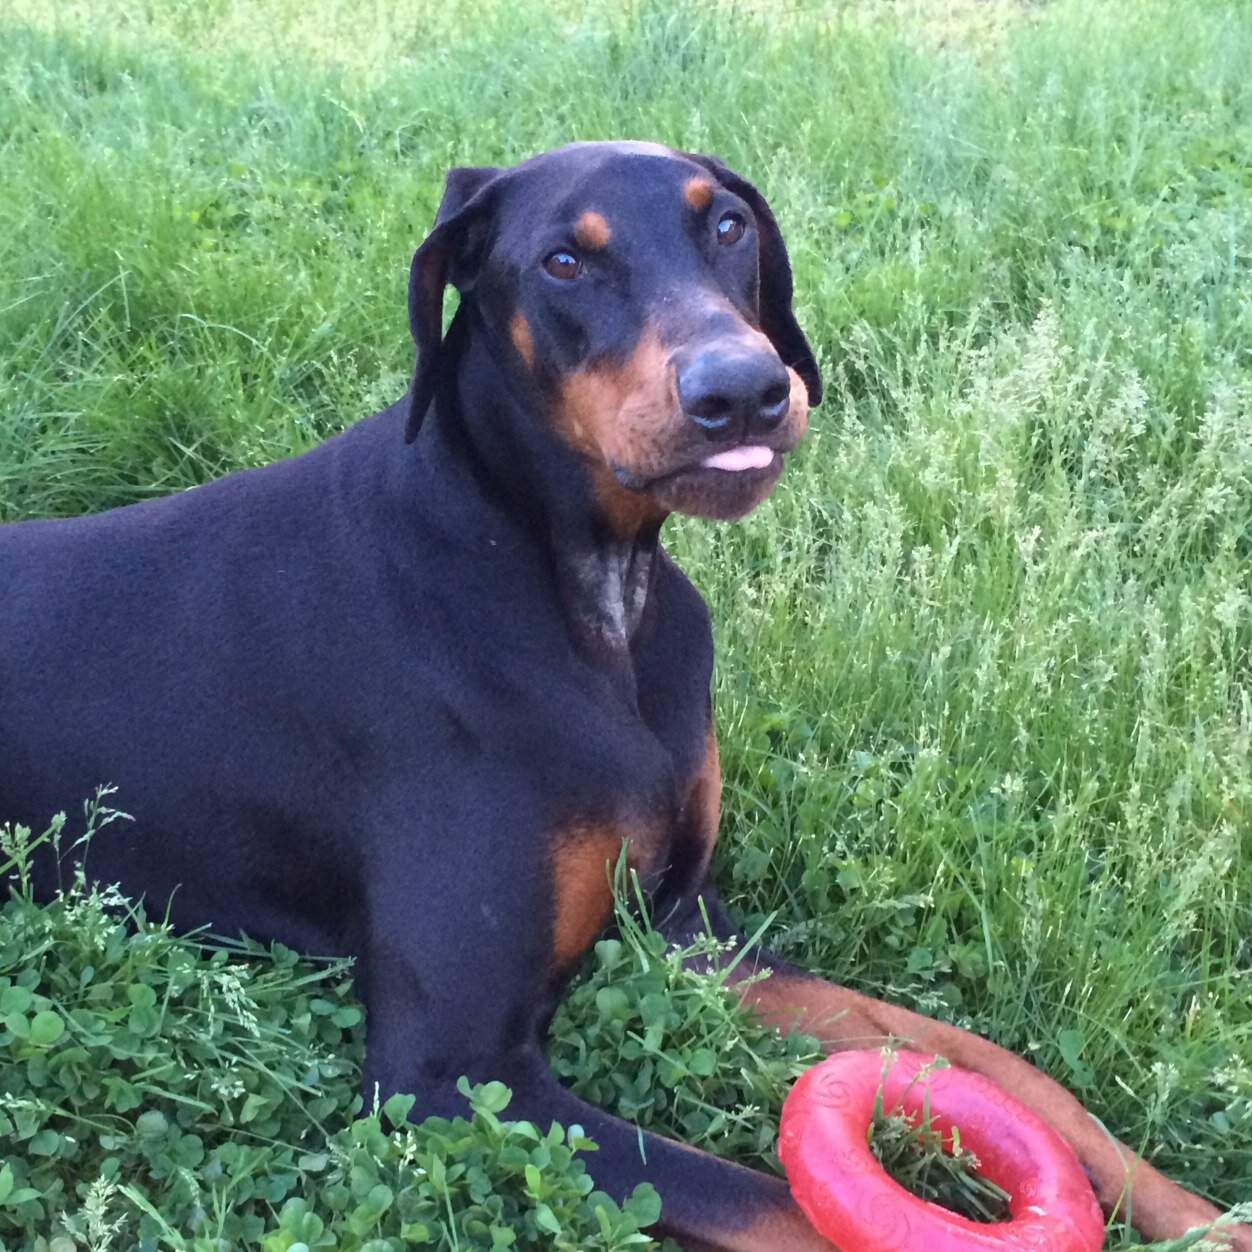 #OTRB Feb 2021 Doberman.Wallbanger. Manager of Puppy aka Clementine. Security enthusiast. Training mom & dad 24/7. #AdoptPets #RescuePets